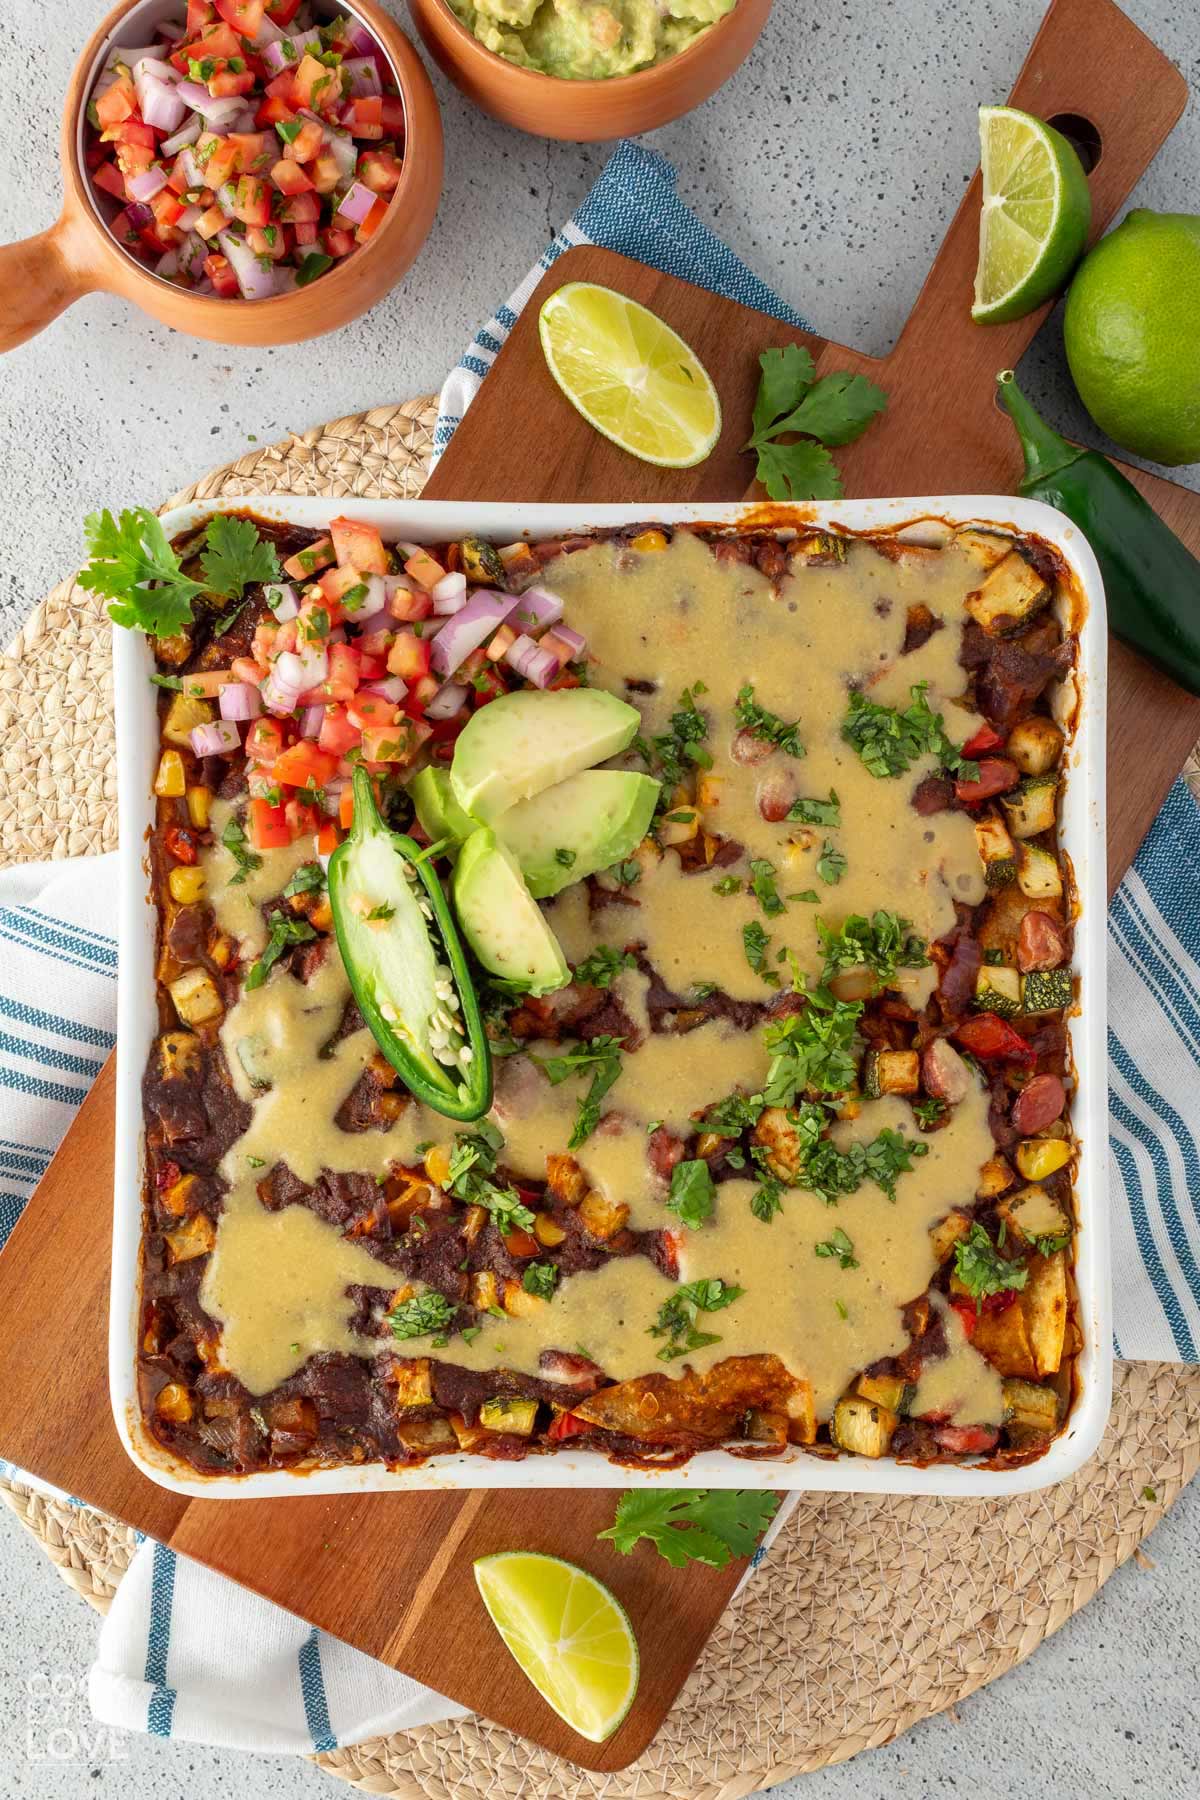 Vegan enchilada casserole in a white casserole dish and the top is garnished with avocado, jalapeno, and pico de gallo.